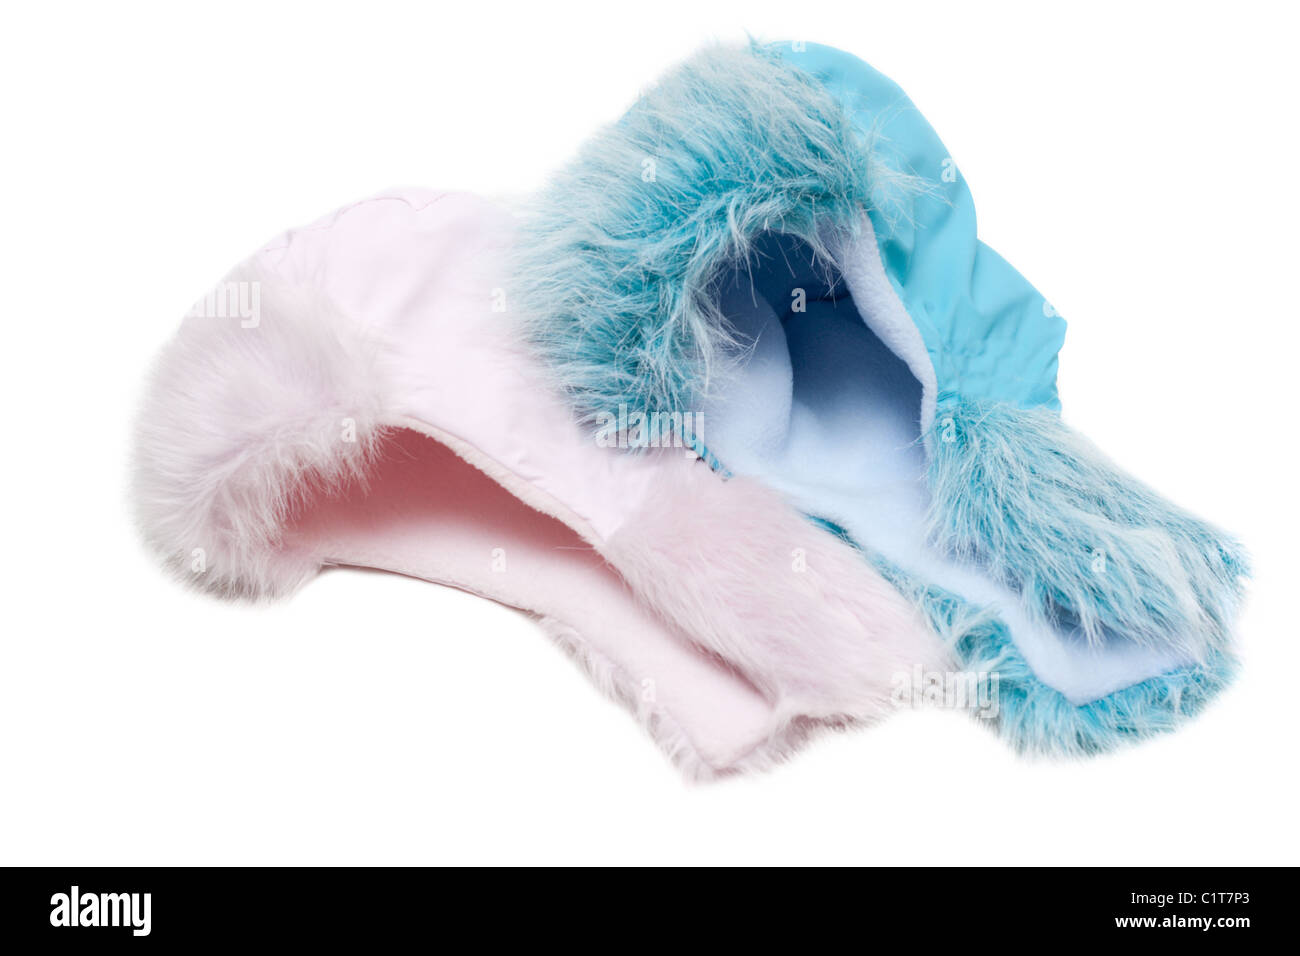 Two winter baby fur hats, rose and blue on white background Stock Photo